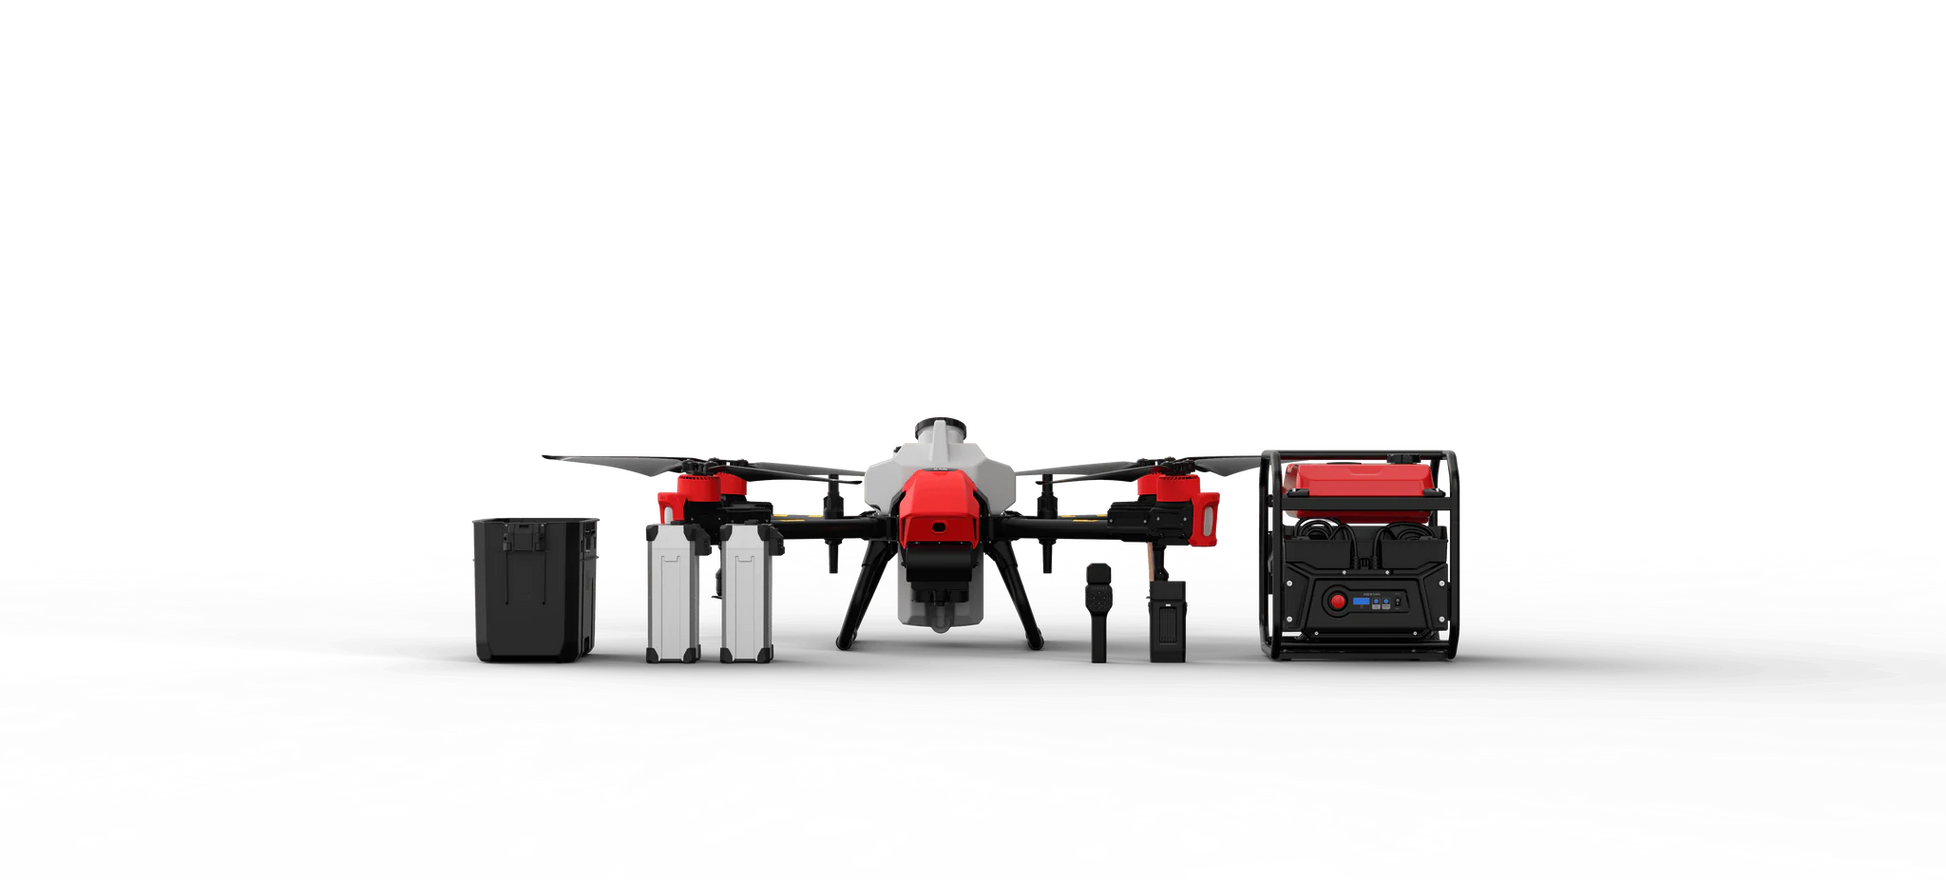 XAG P40 20L Agriculture Drone